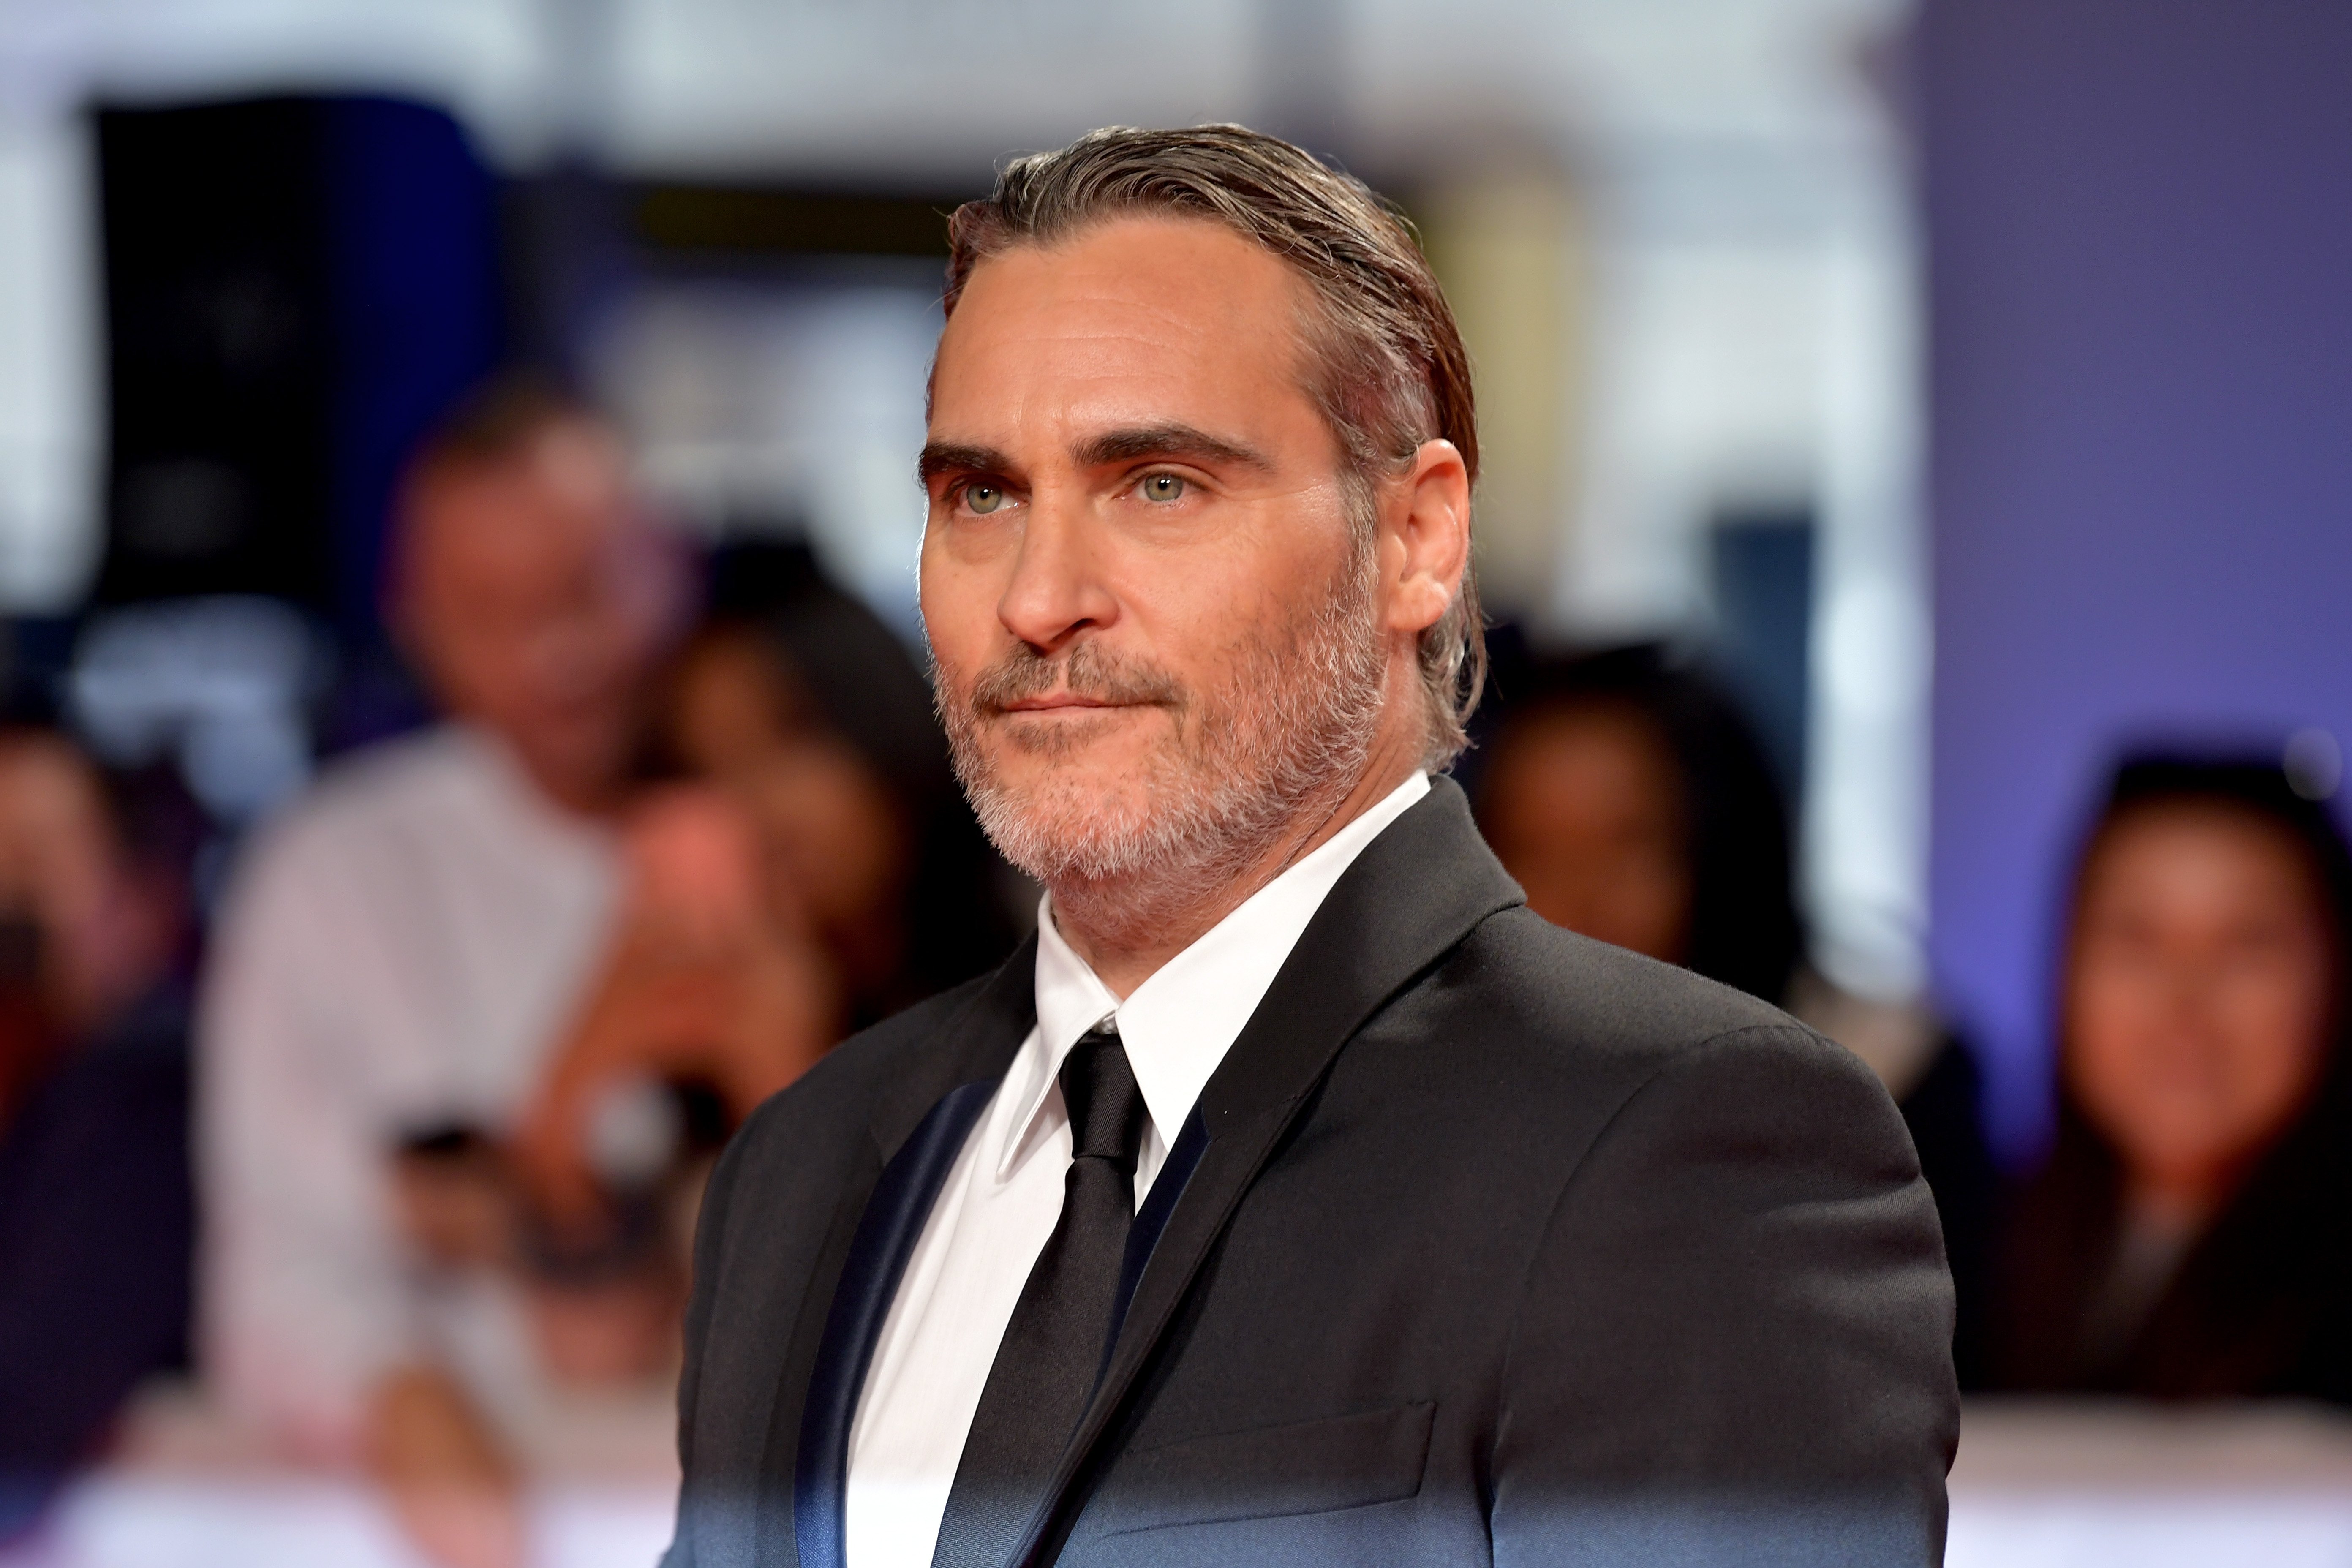 Joaquin Phoenix attends the "Joker" premiere during the 2019 Toronto International Film Festival at Roy Thomson Hall on September 09, 2019 | Photo: GettyImages